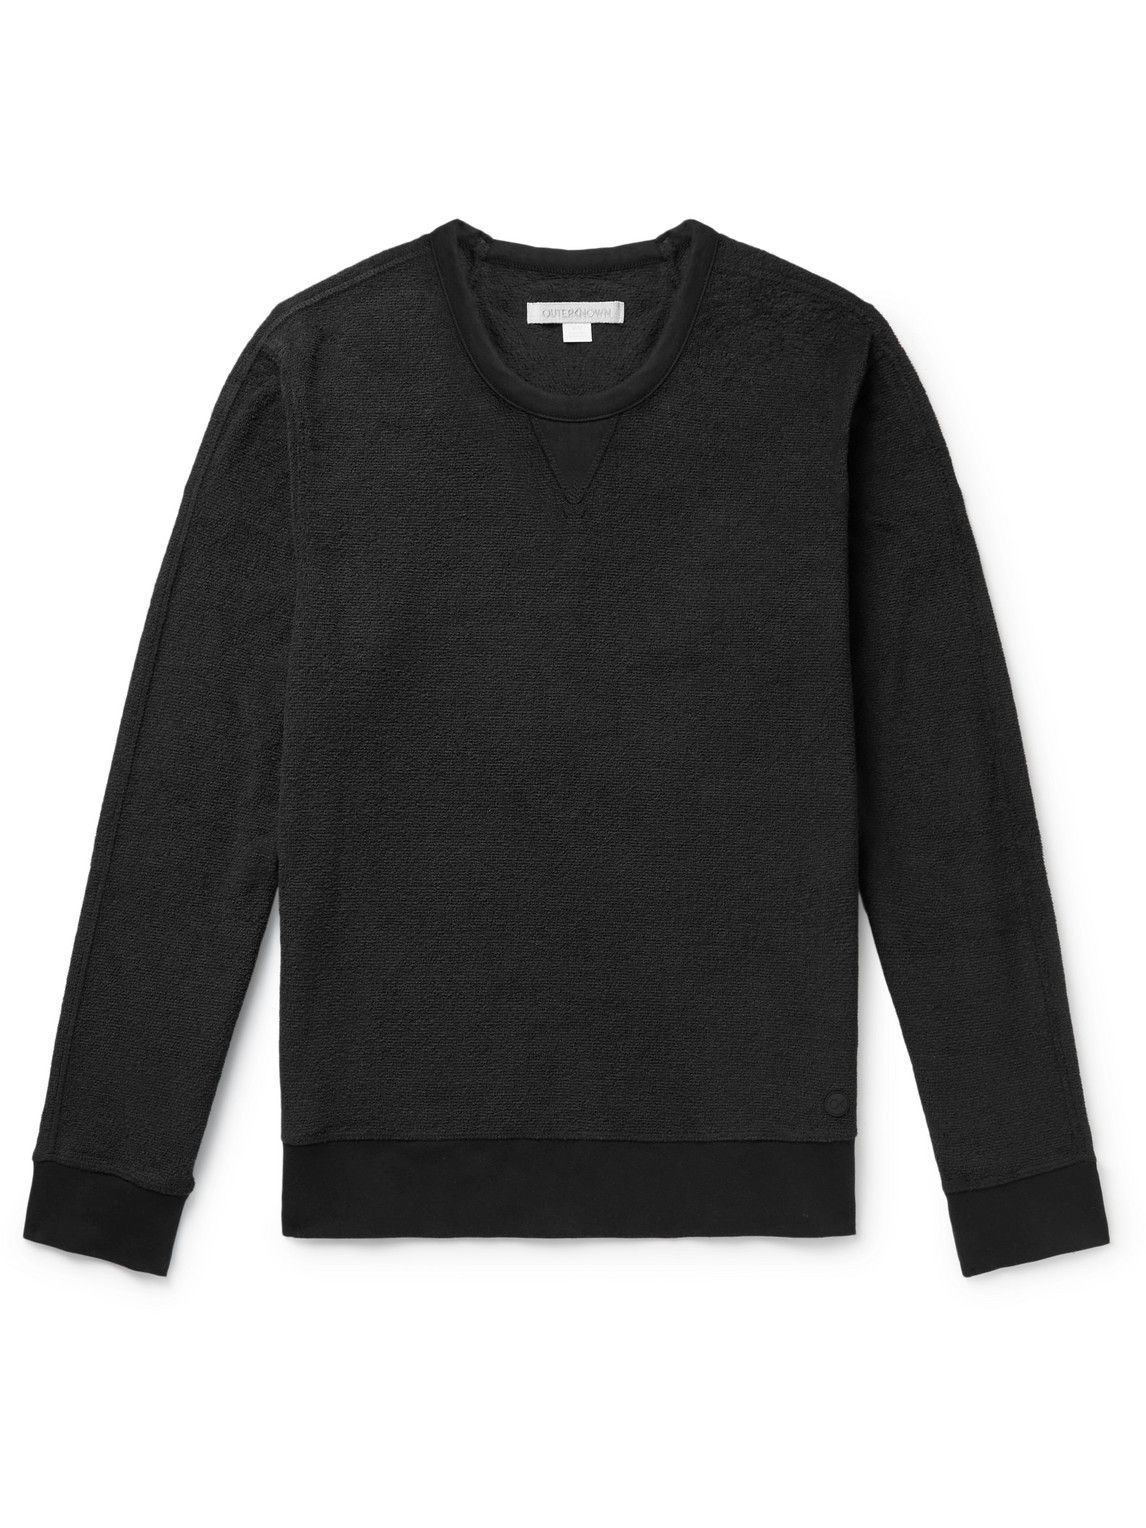 OUTERKNOWN Hightide Crew Organic Cotton-Blend Terry Sweatshirt for